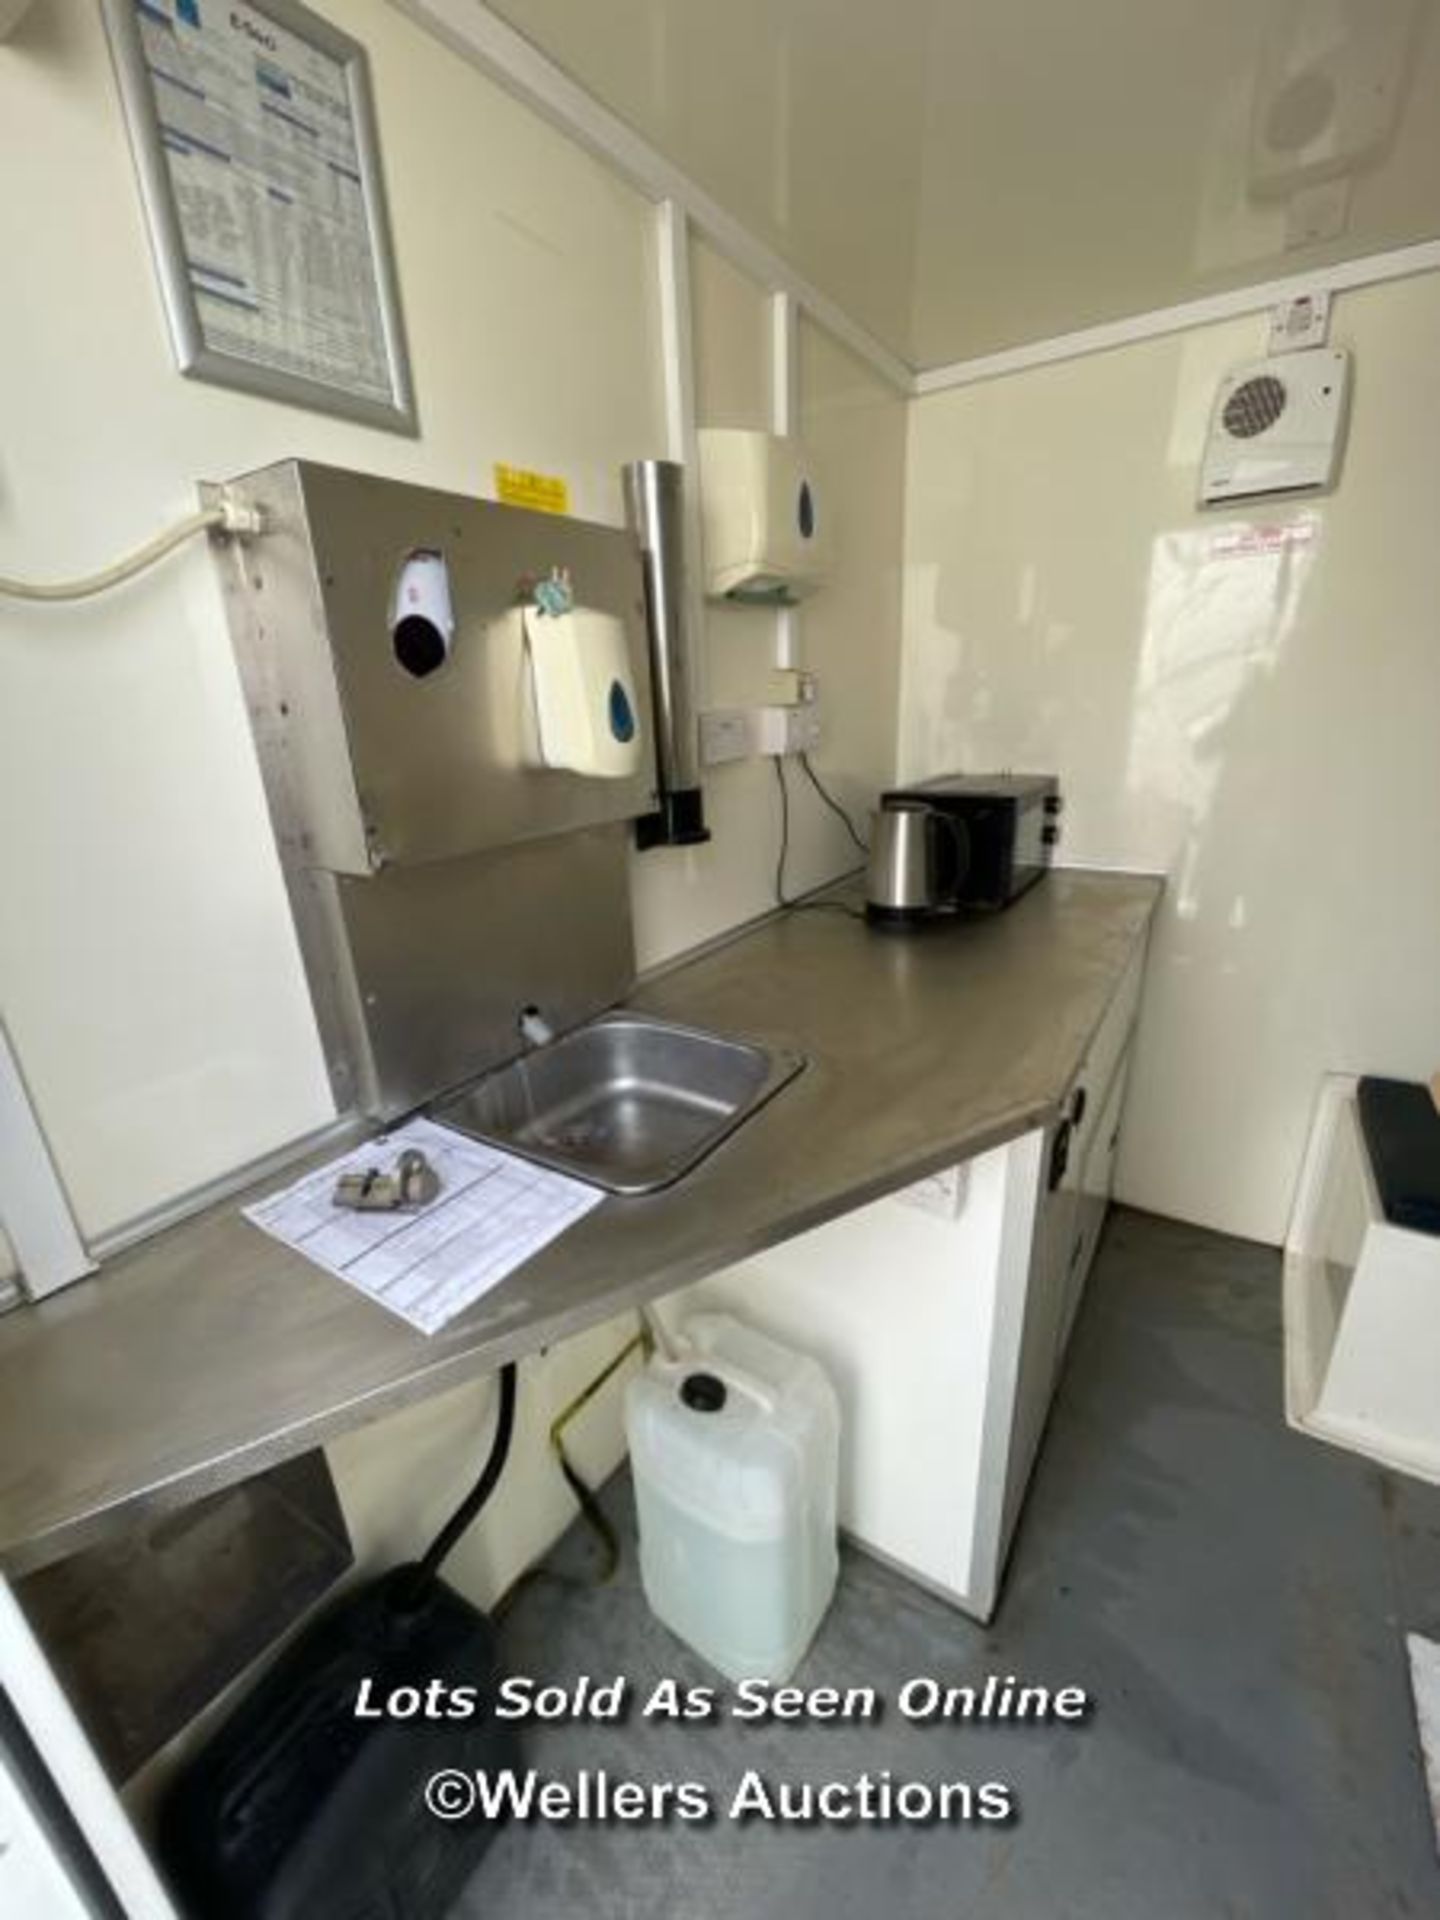 6 PERSON 12 X 7.5FT AJC EASY CABIN TOWABLE WELFARE UNIT, INCLUDES WASH BASIN, KETTLE, MICROWAVE, - Image 8 of 18